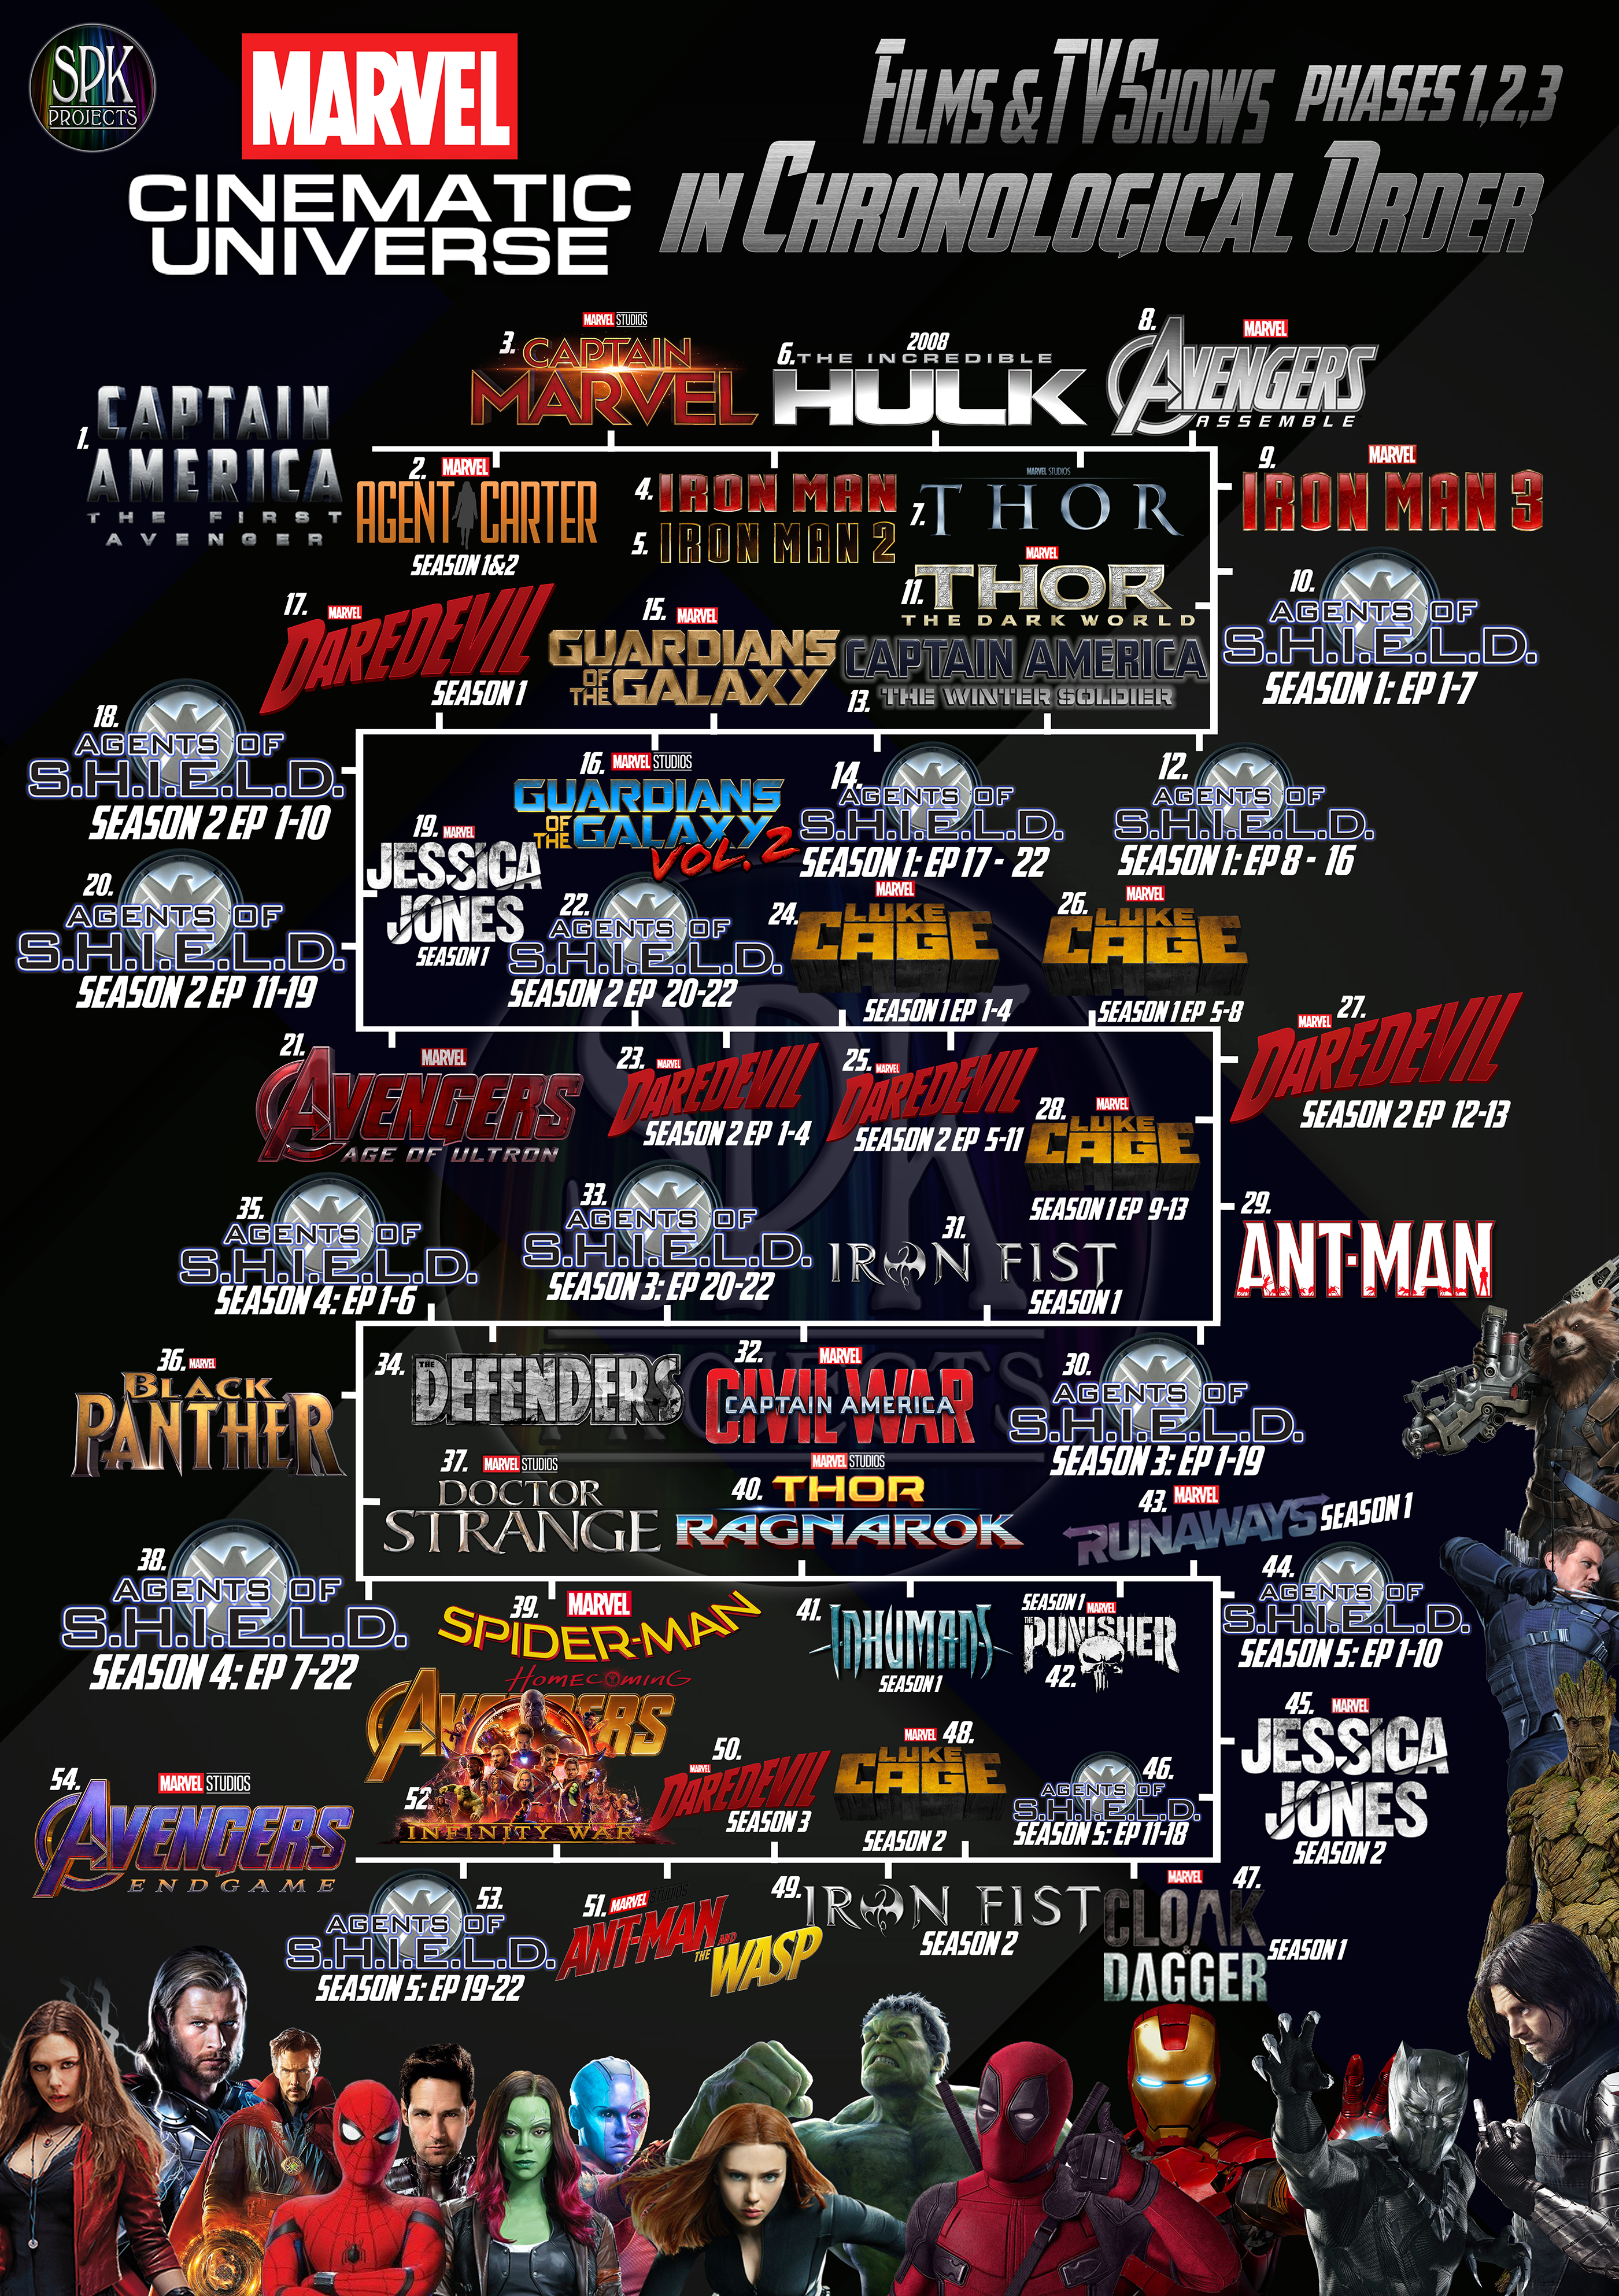 The Marvel Cinematic Universe in Chronological Order. :: Behance